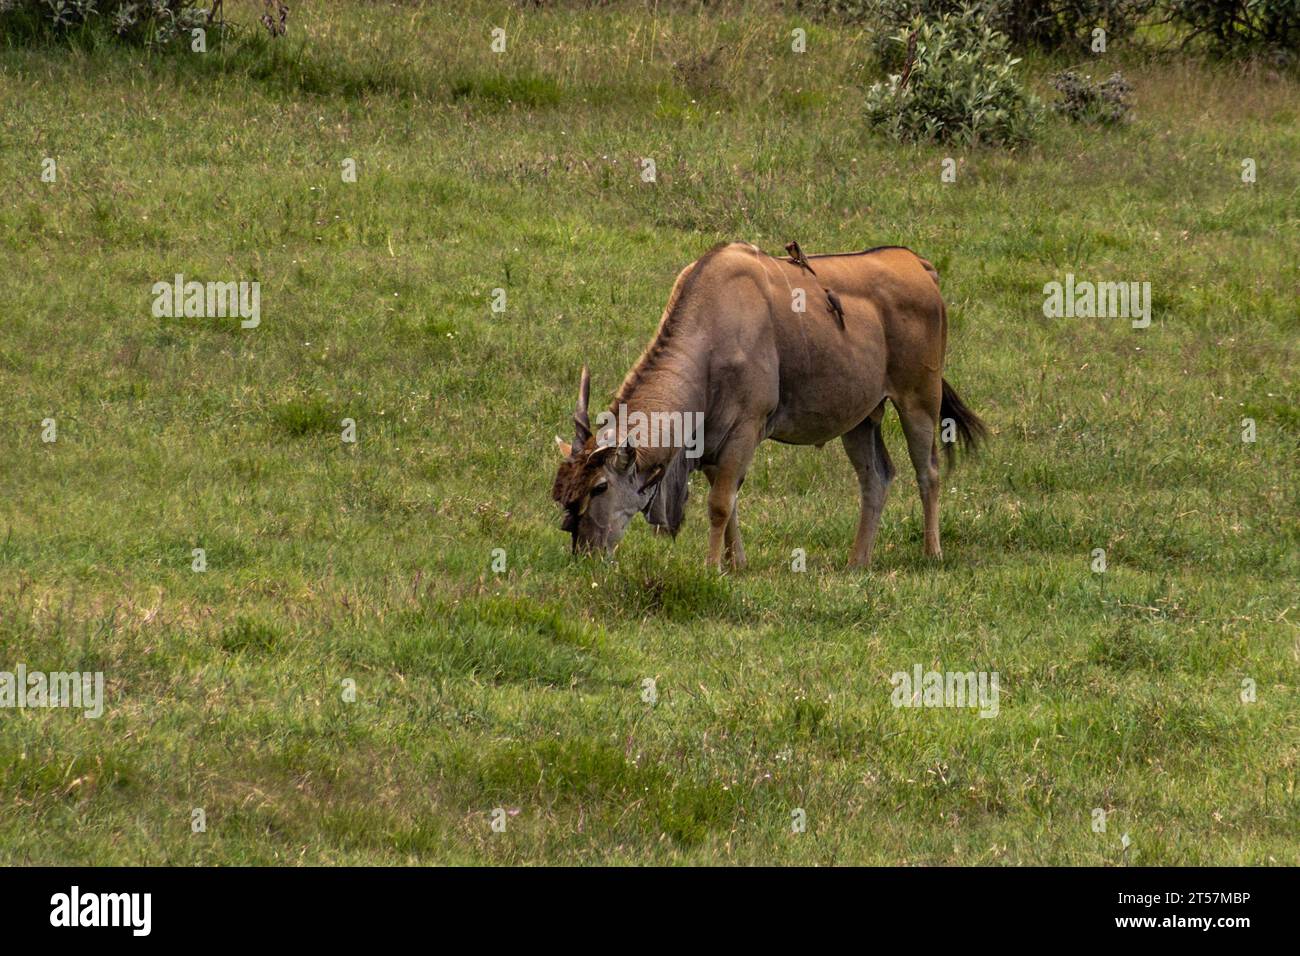 East African Eland (Tragelaphus oryx) in the Hell's Gate National Park, Kenya Stock Photo